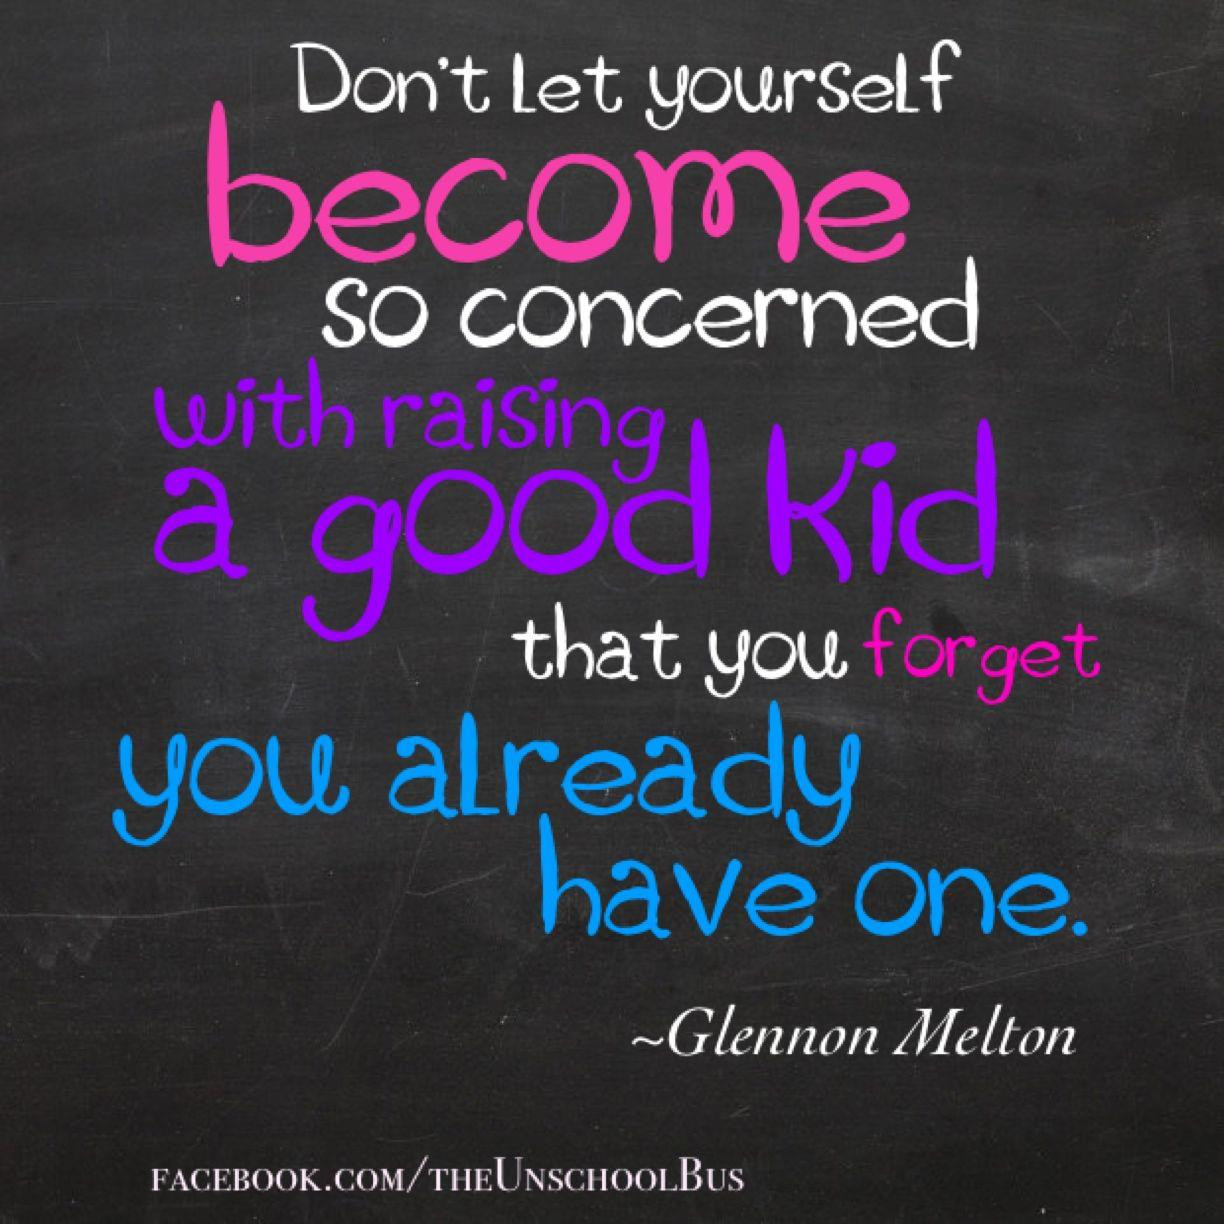 Good Quotes For Children
 “Don’t let yourself be e so concerned with raising a